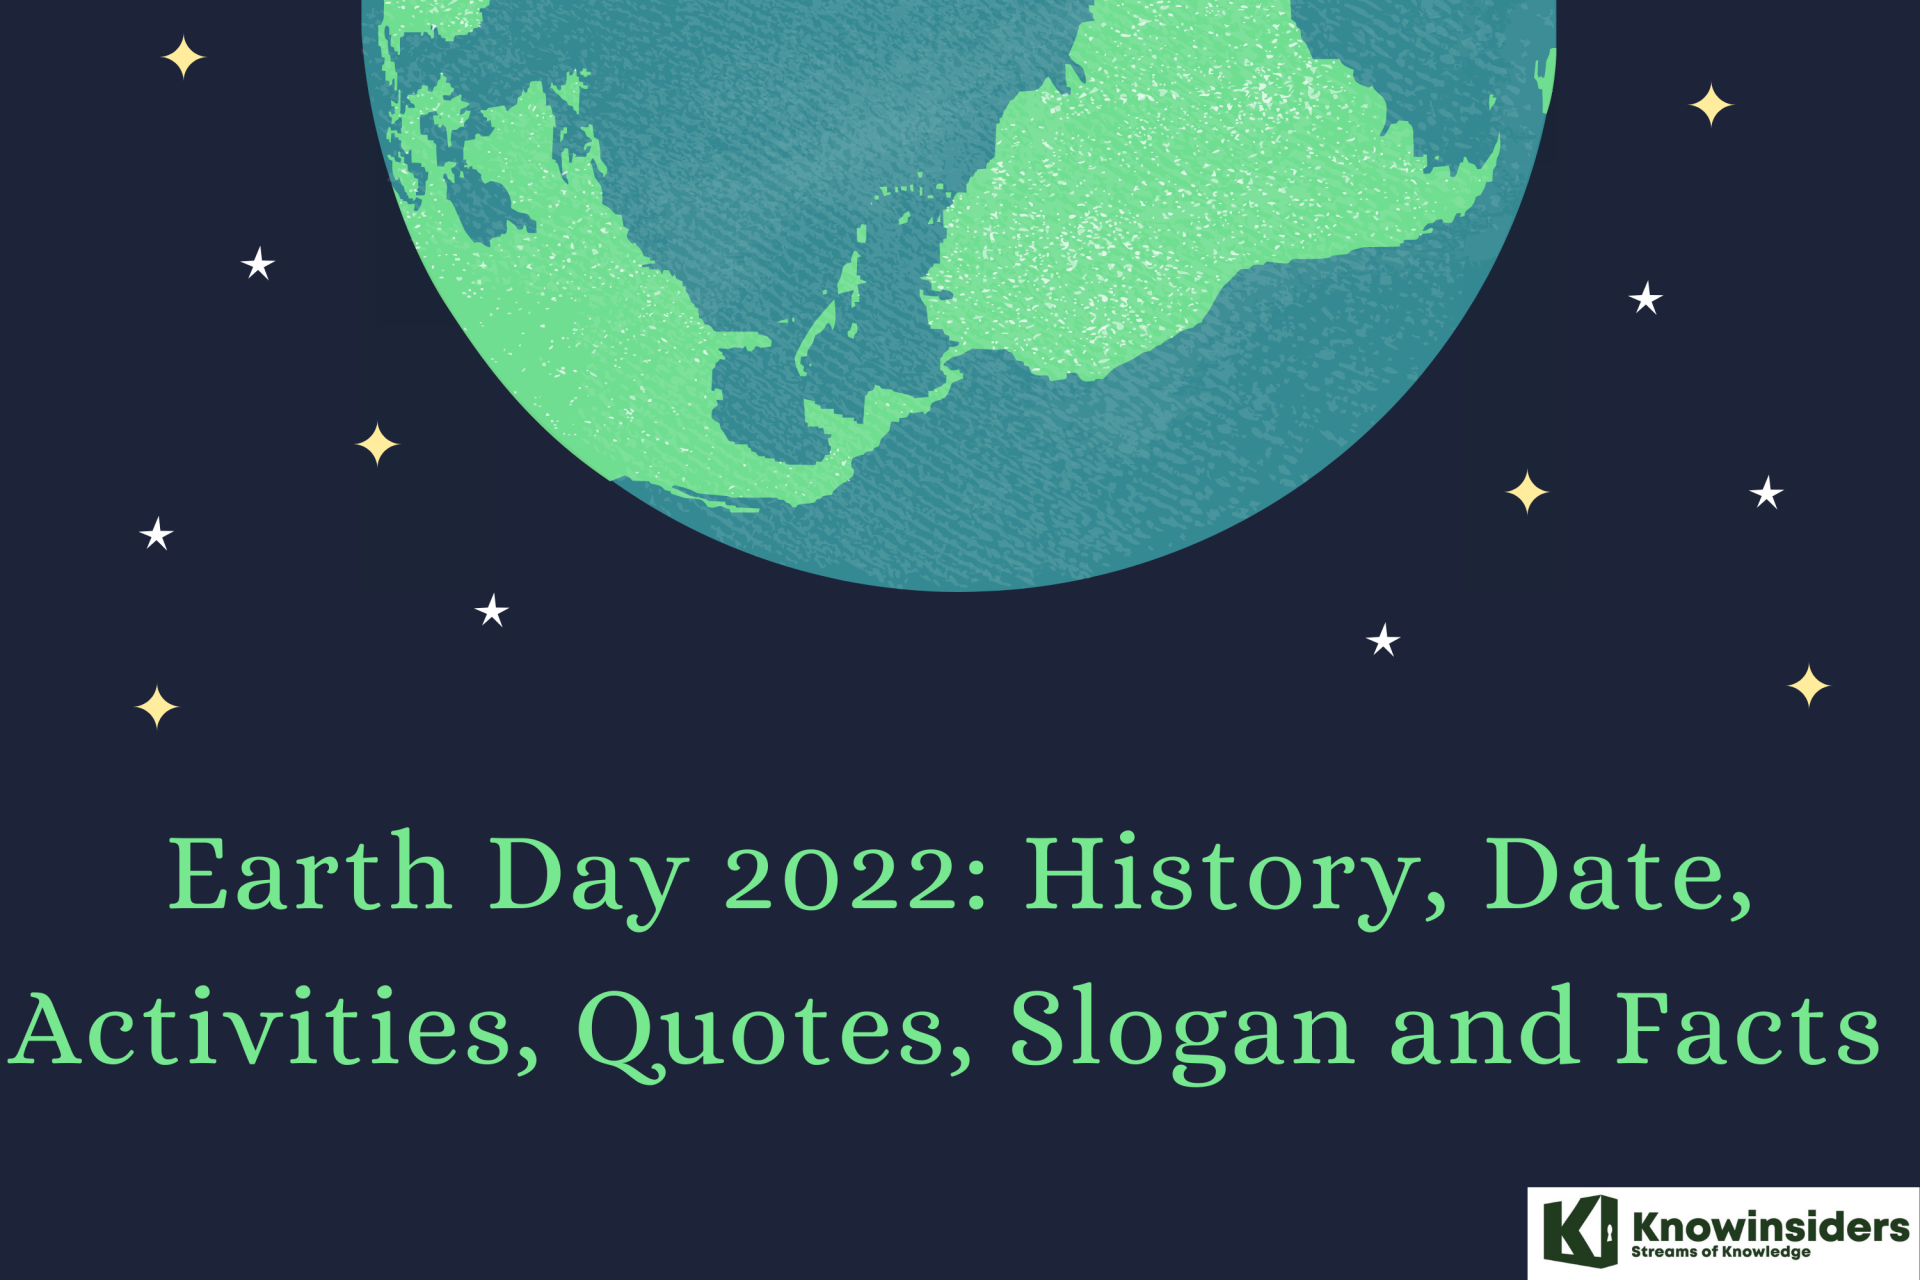 Earth Day: History, Date, Activities, Quotes, Slogan and Facts